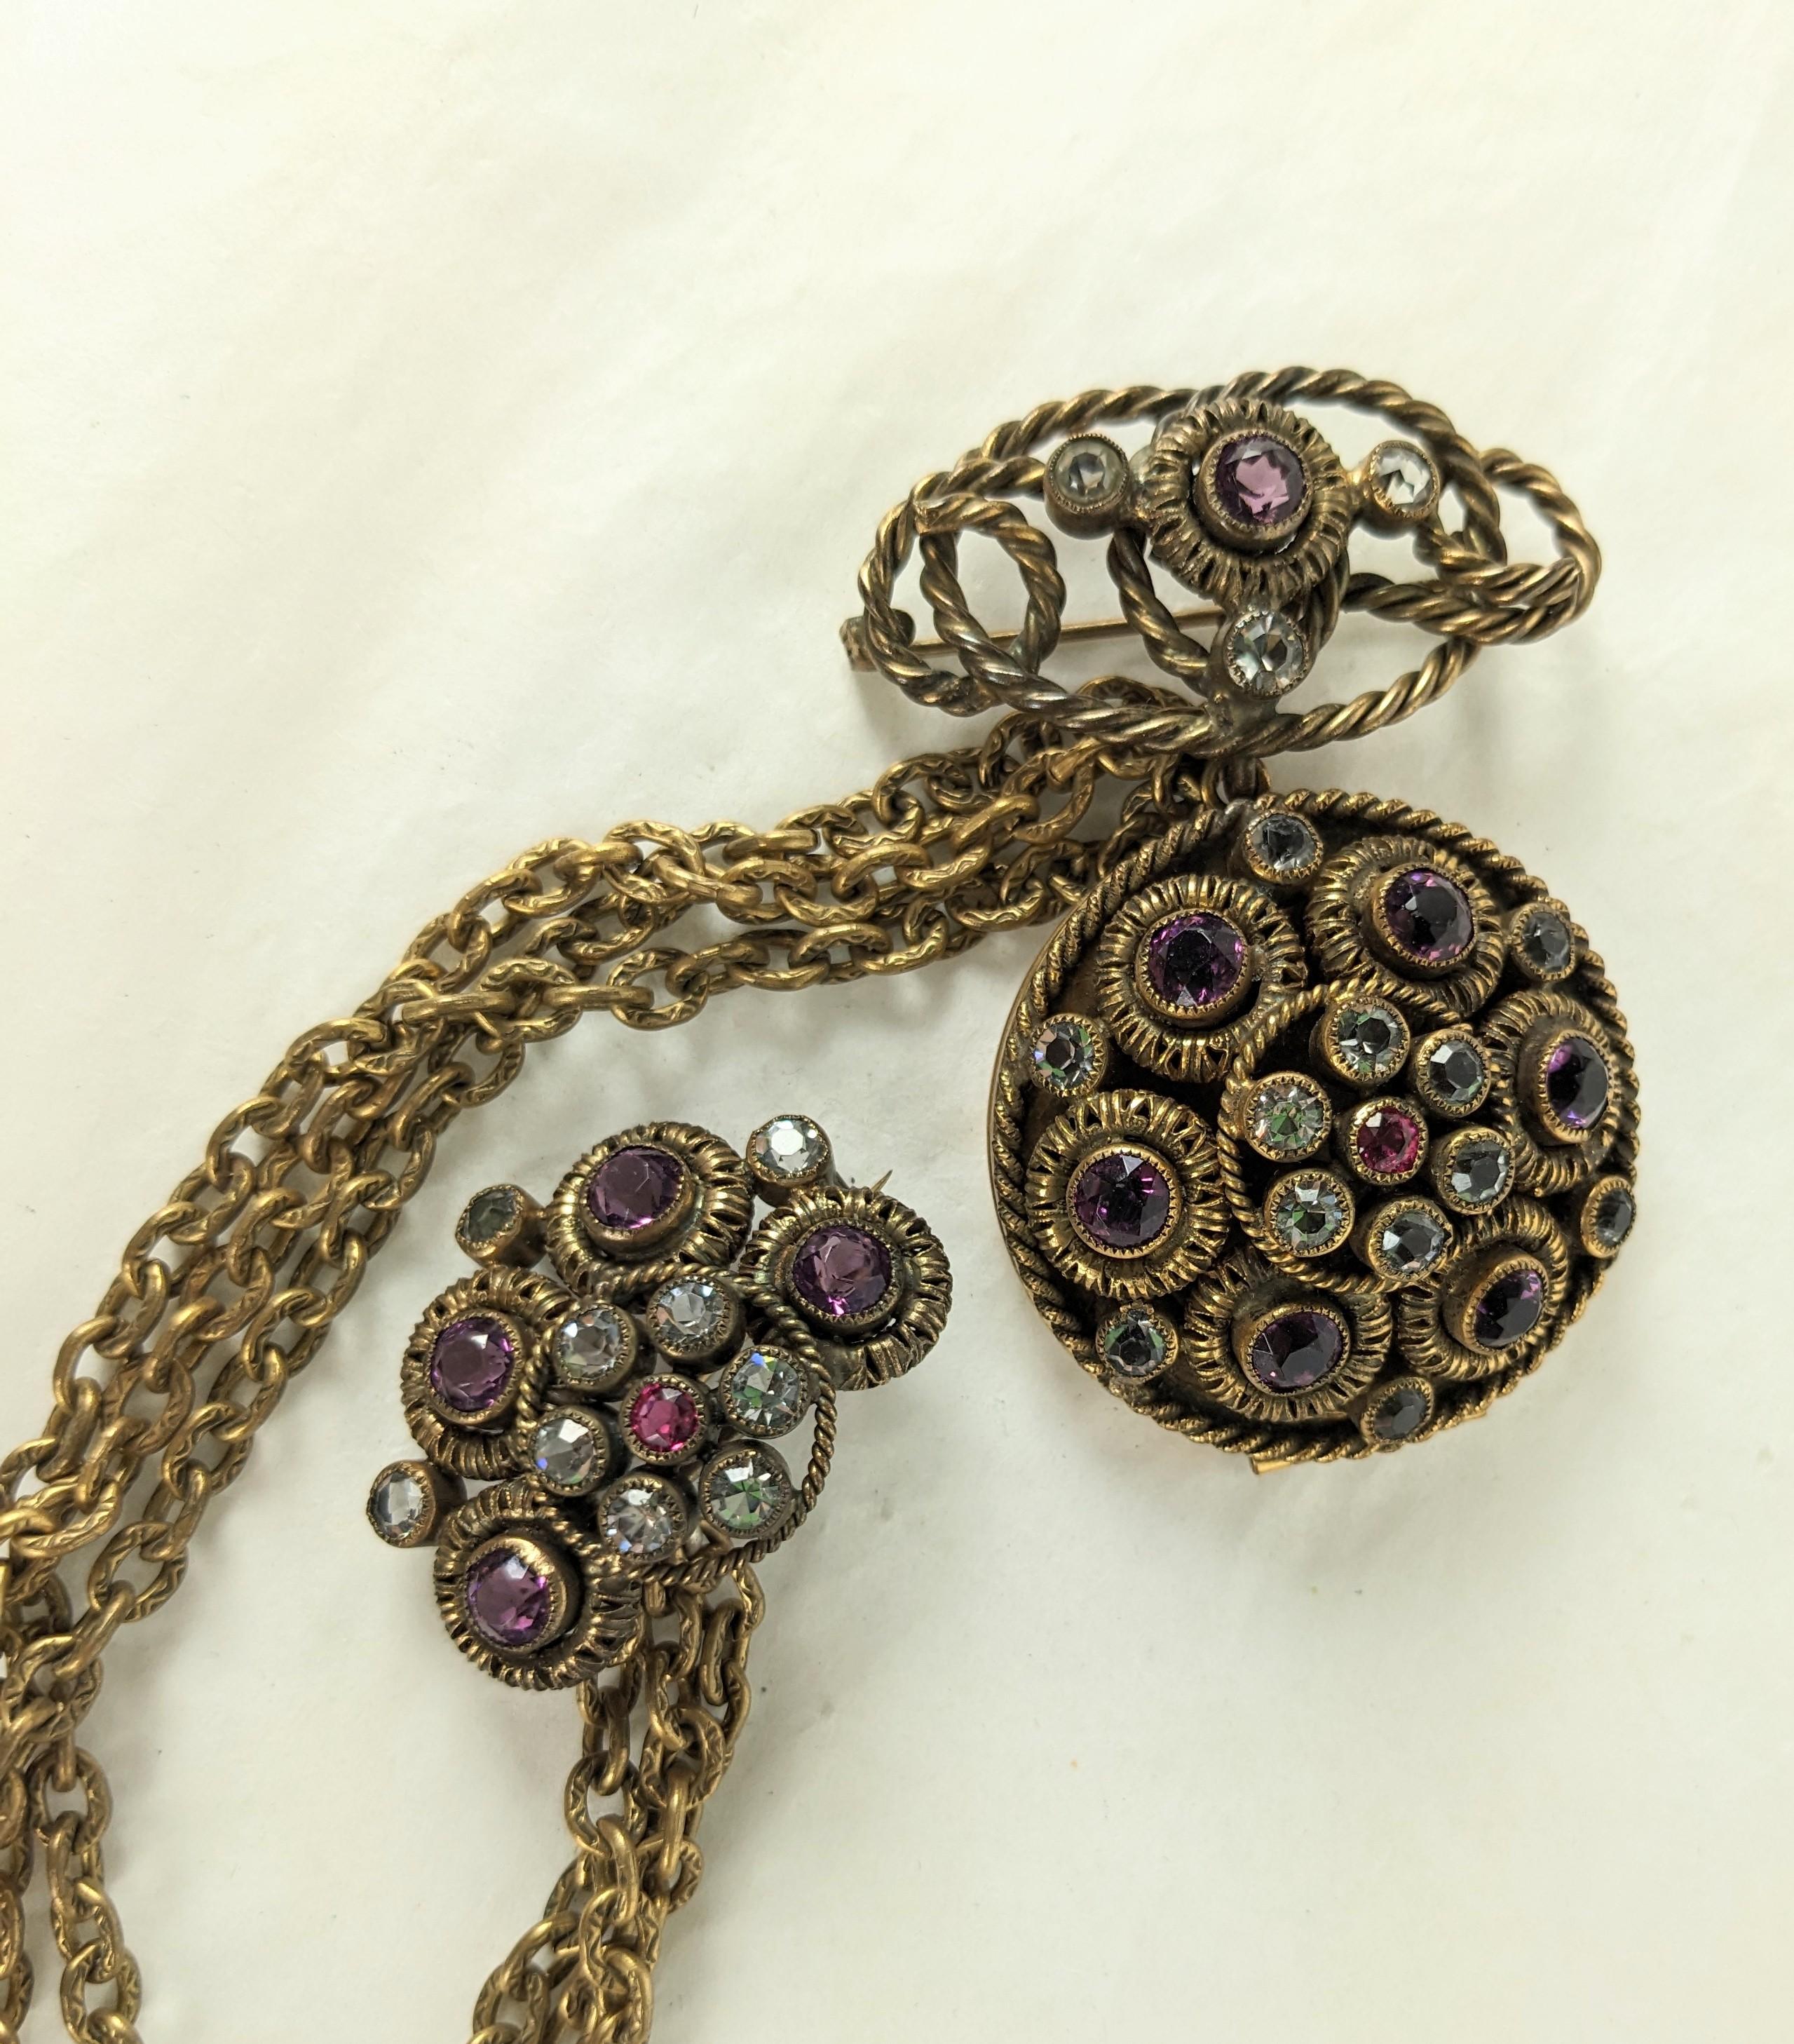 Unusual Sandor Jeweled Locket Chatelaine Brooch from the 1940's. Set in antique bronze finish with paste set locket in crystal, purple and ruby with swag chaining. 1940's USA. Locket brooch 2.5